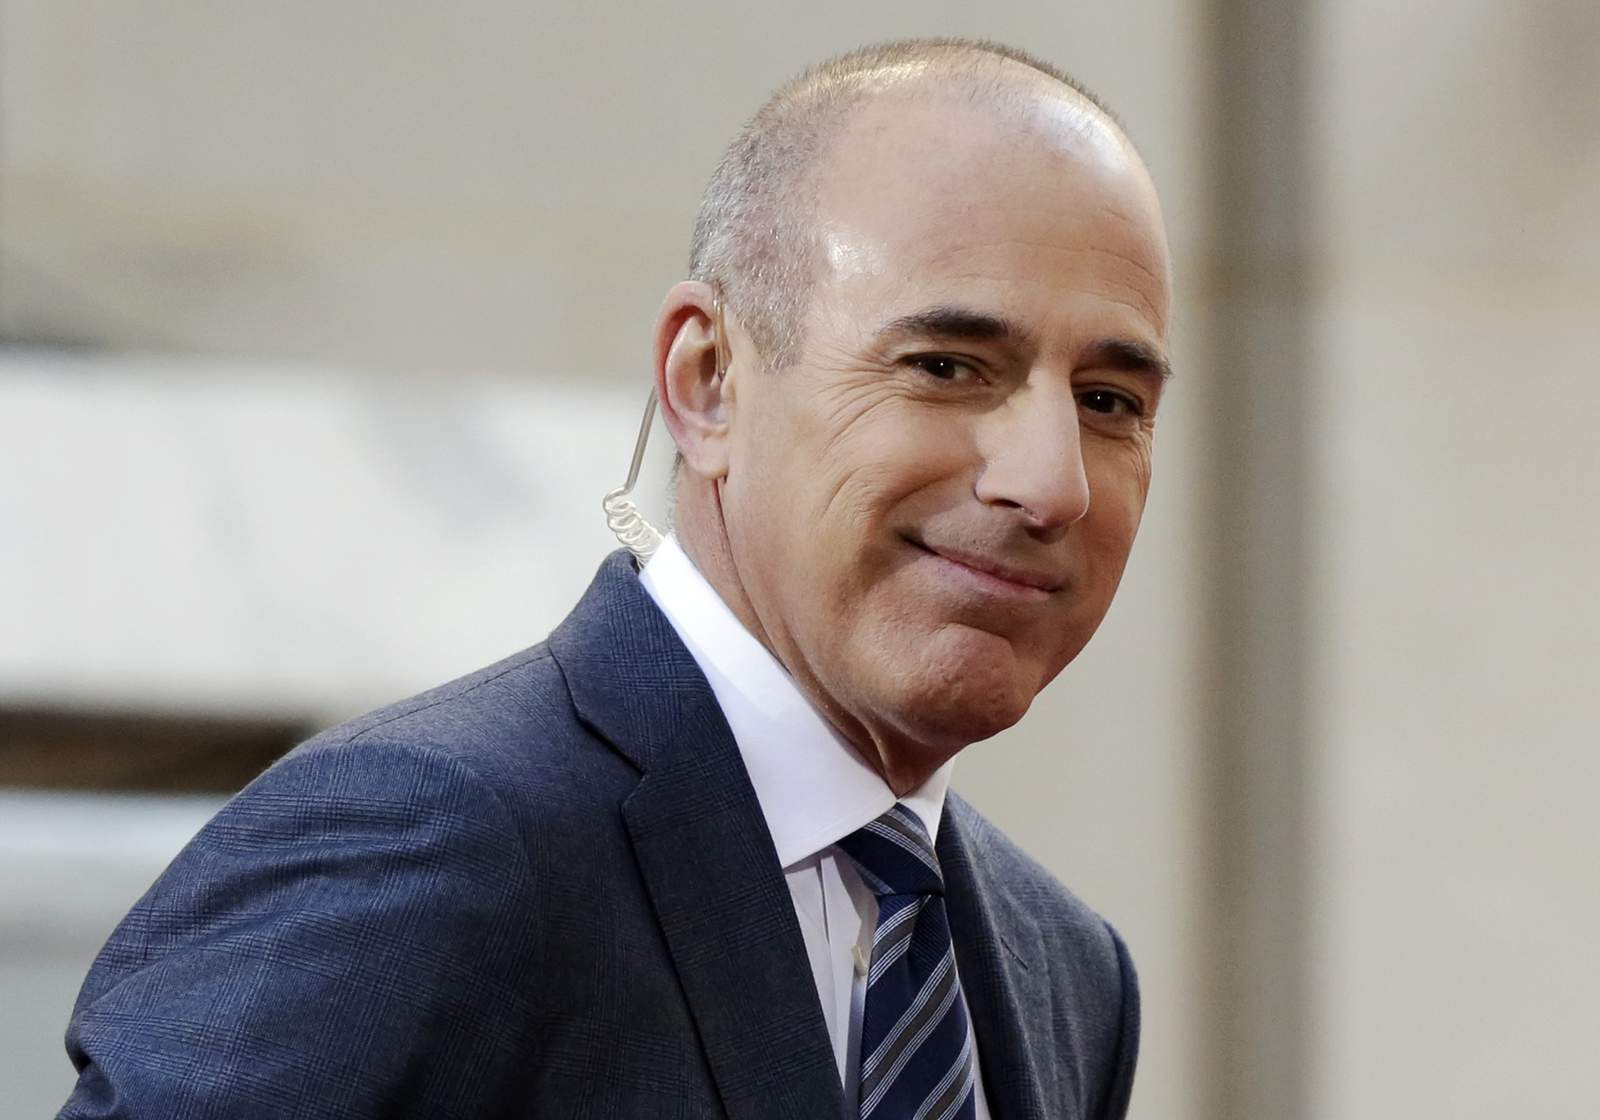 Lauer says Ronan Farrow's work on him was shoddy and biased